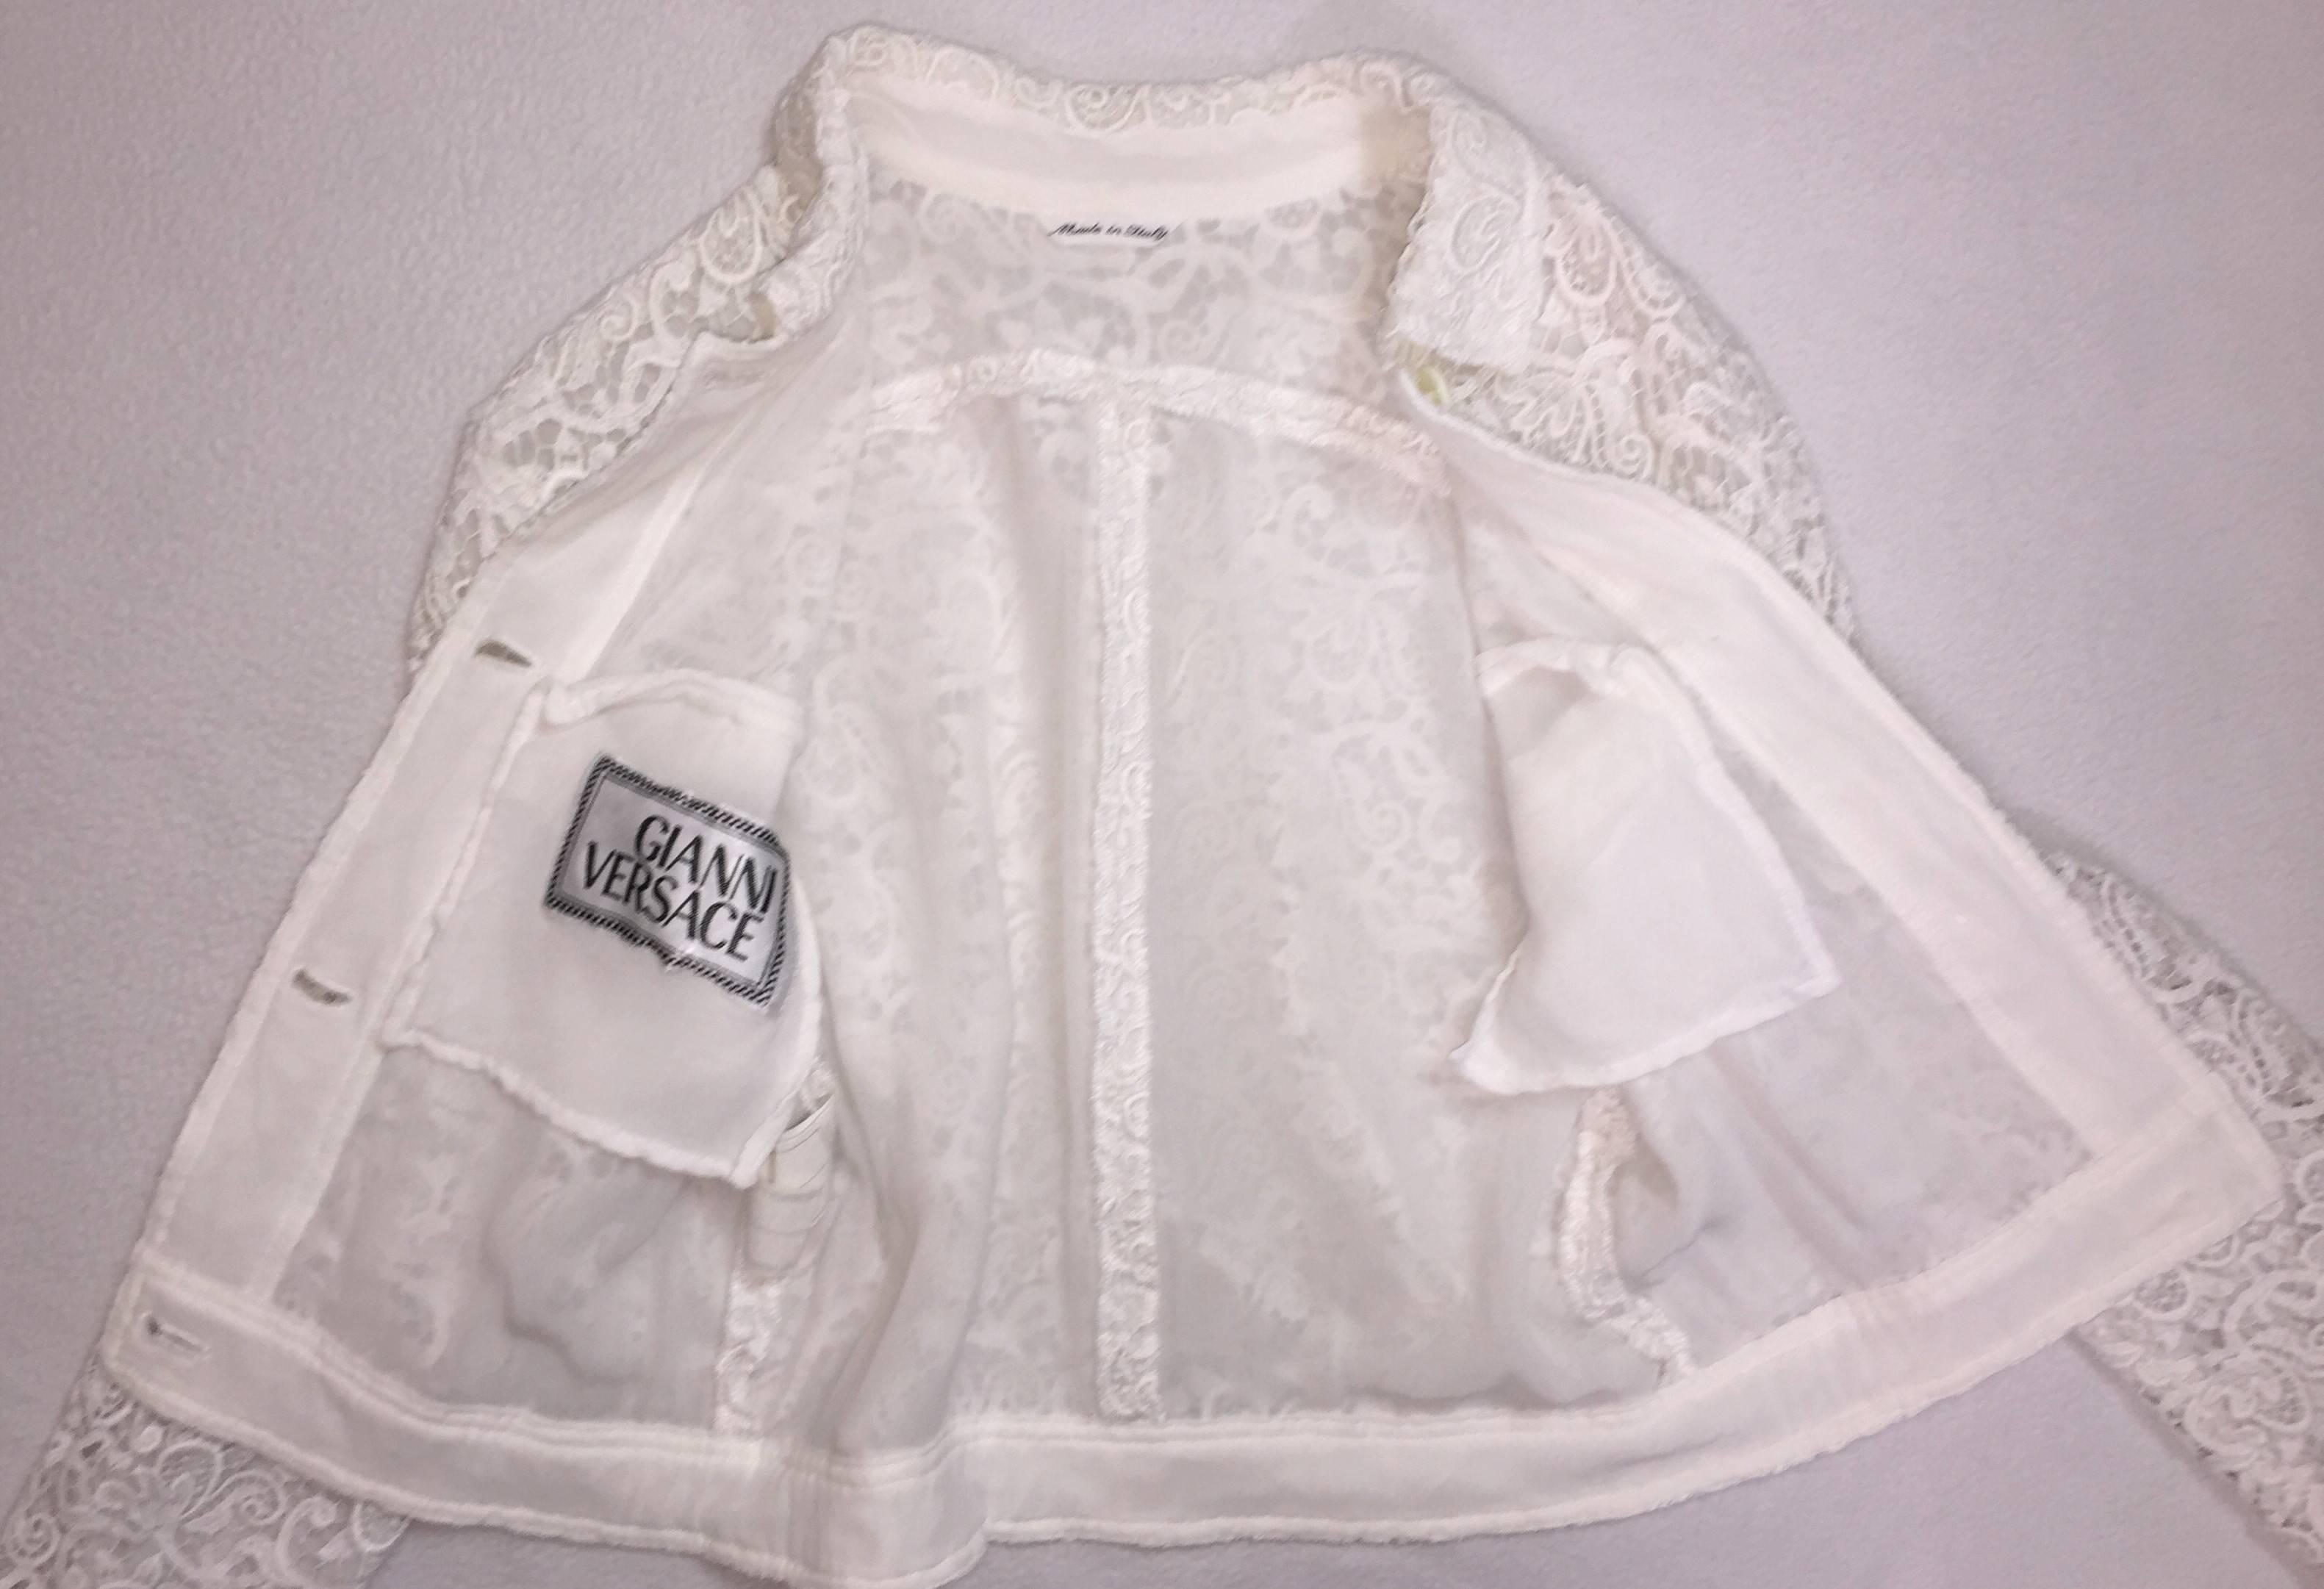 Gray S/S 1994 Gianni Versace Sheer White Lace Cropped Short Jacket 38